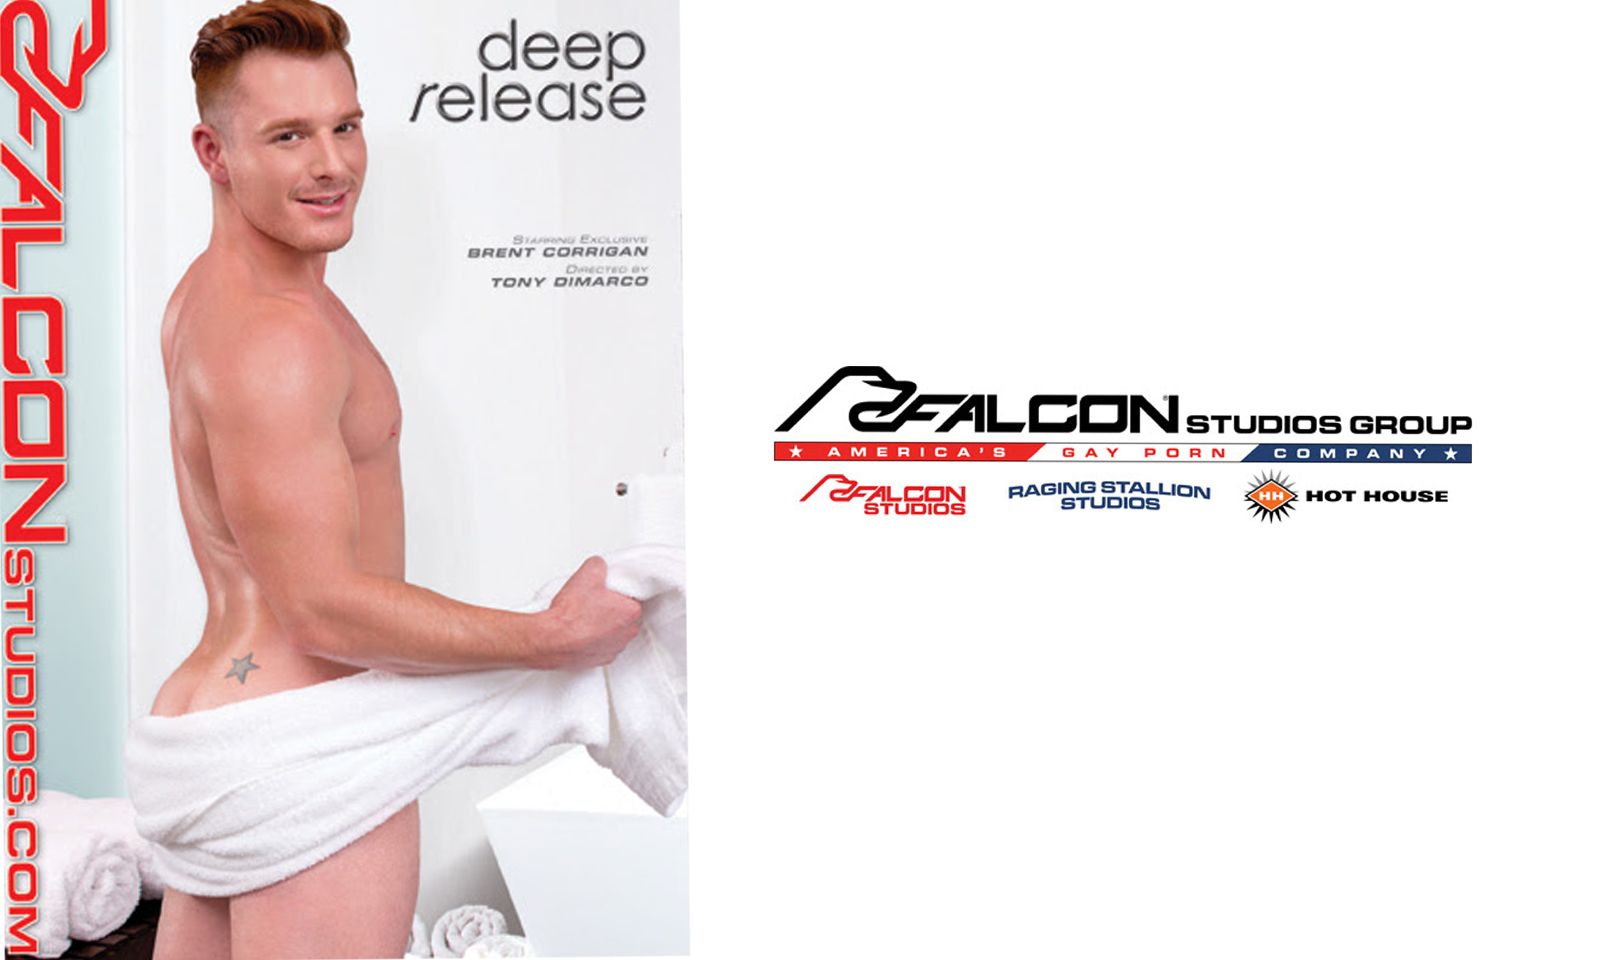 Falcon Studios' Indulgent Spa Experience Offers 'Deep Release'